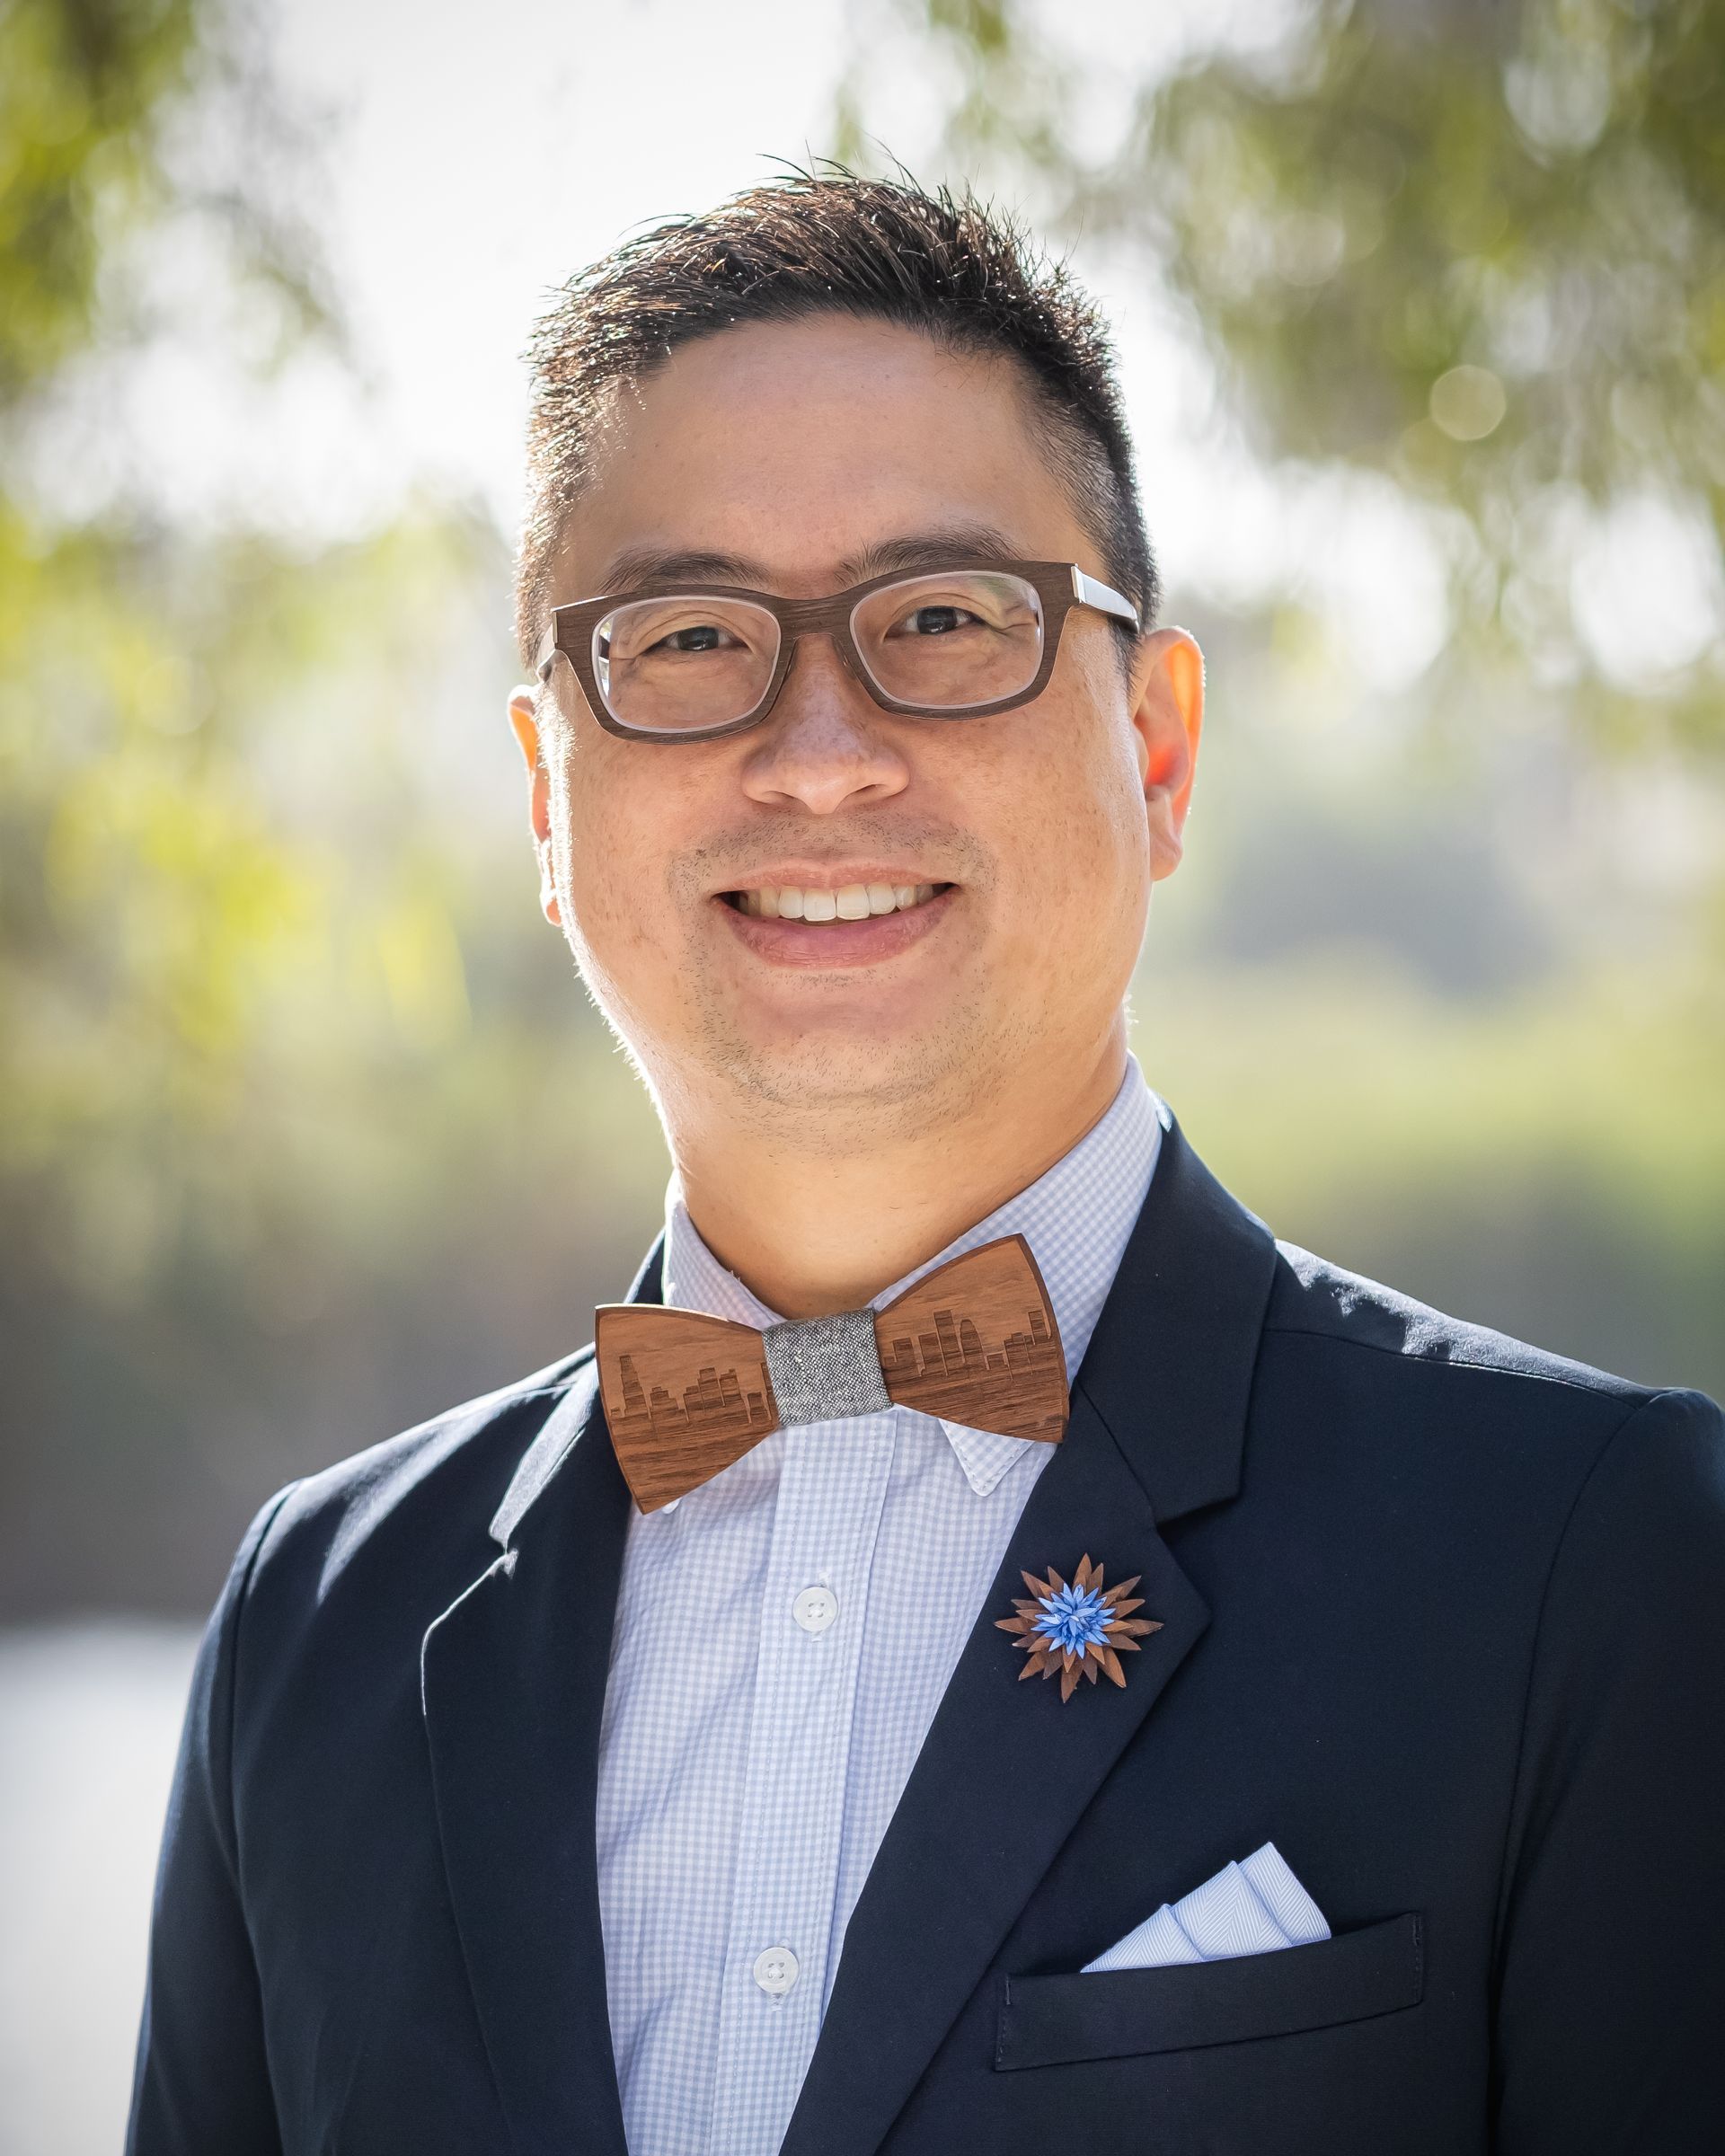 Dr. Gene Liu in a suit and bow tie is smiling for the camera.